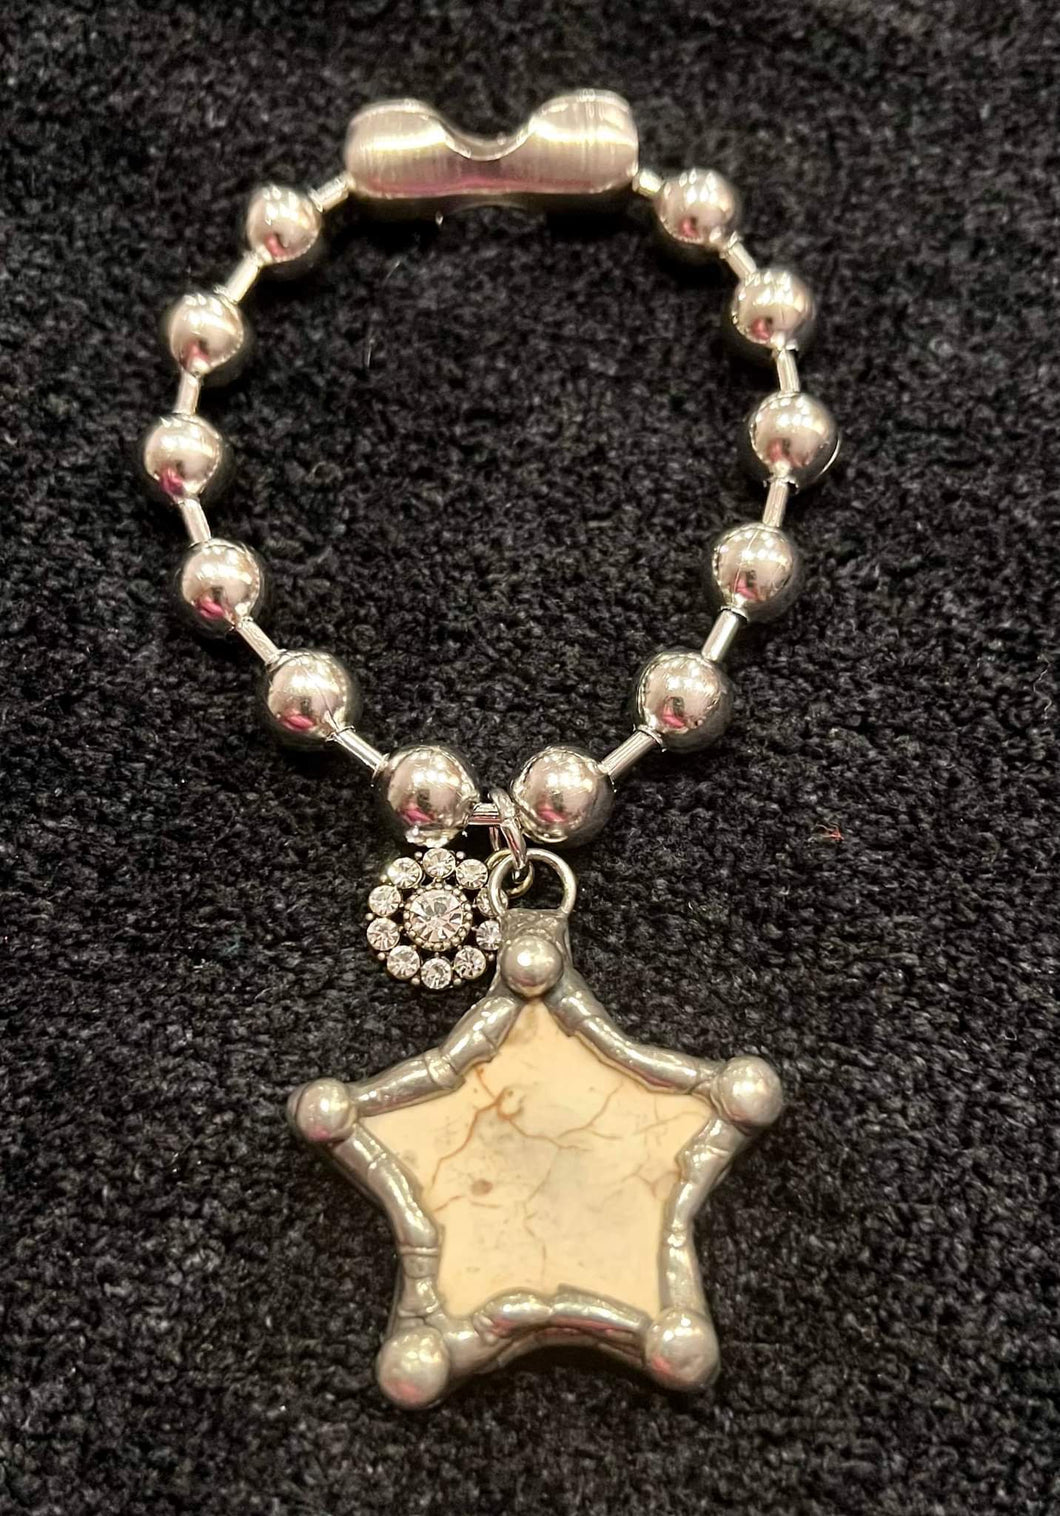 Westen Bracelet with Large Star in Stone by J. Coons